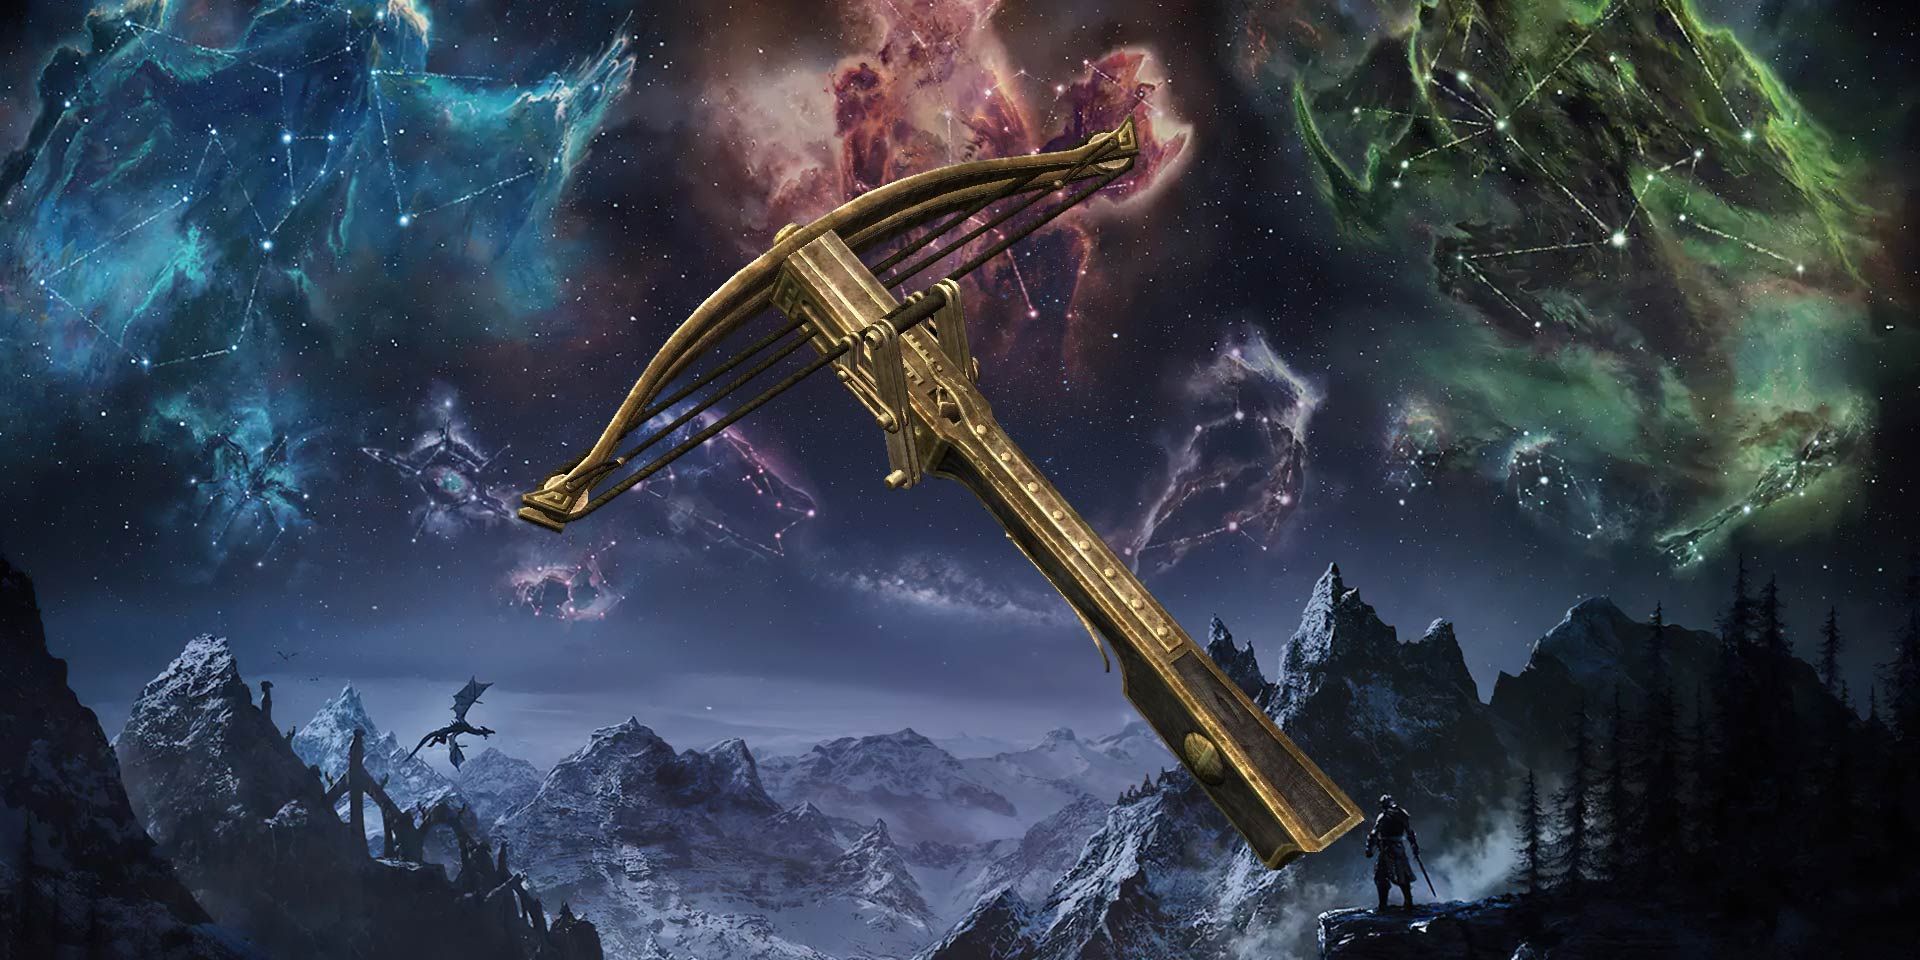 An Enhanced Dwarven Crossbow among mountains and Elder Scrolls star signs.